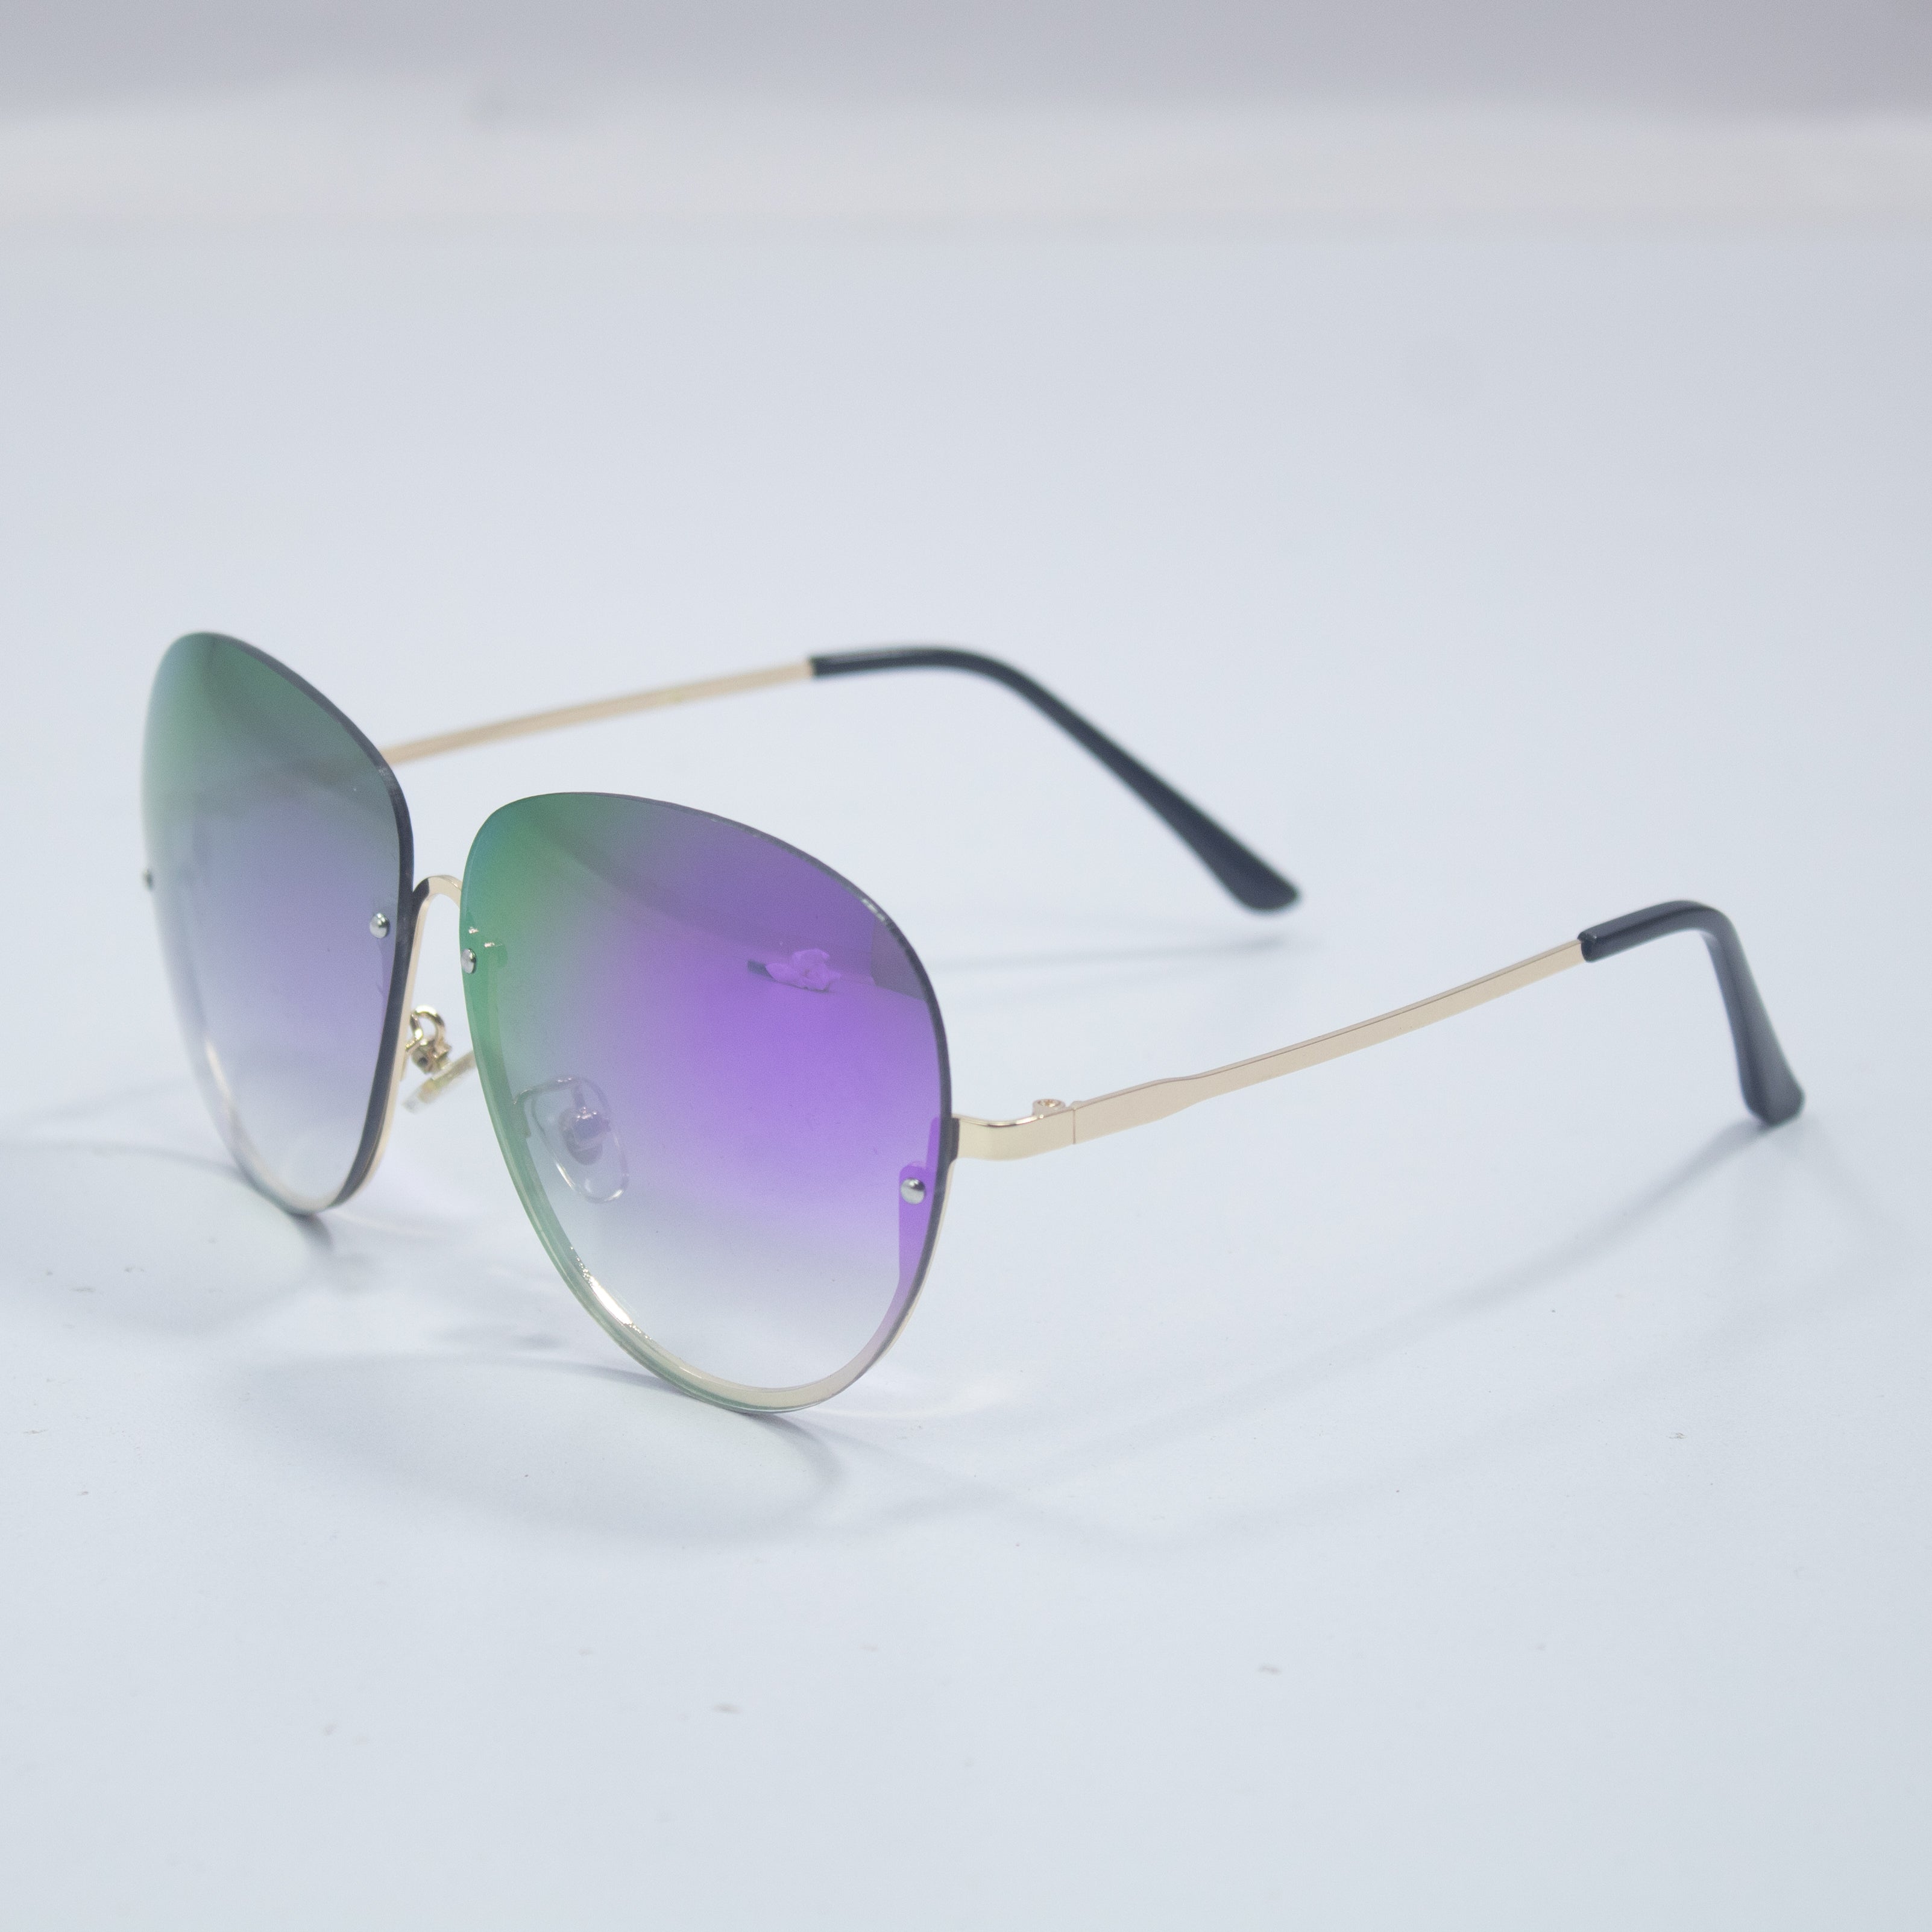 TWO COLORS SUN GLASSES FOR WOMEN